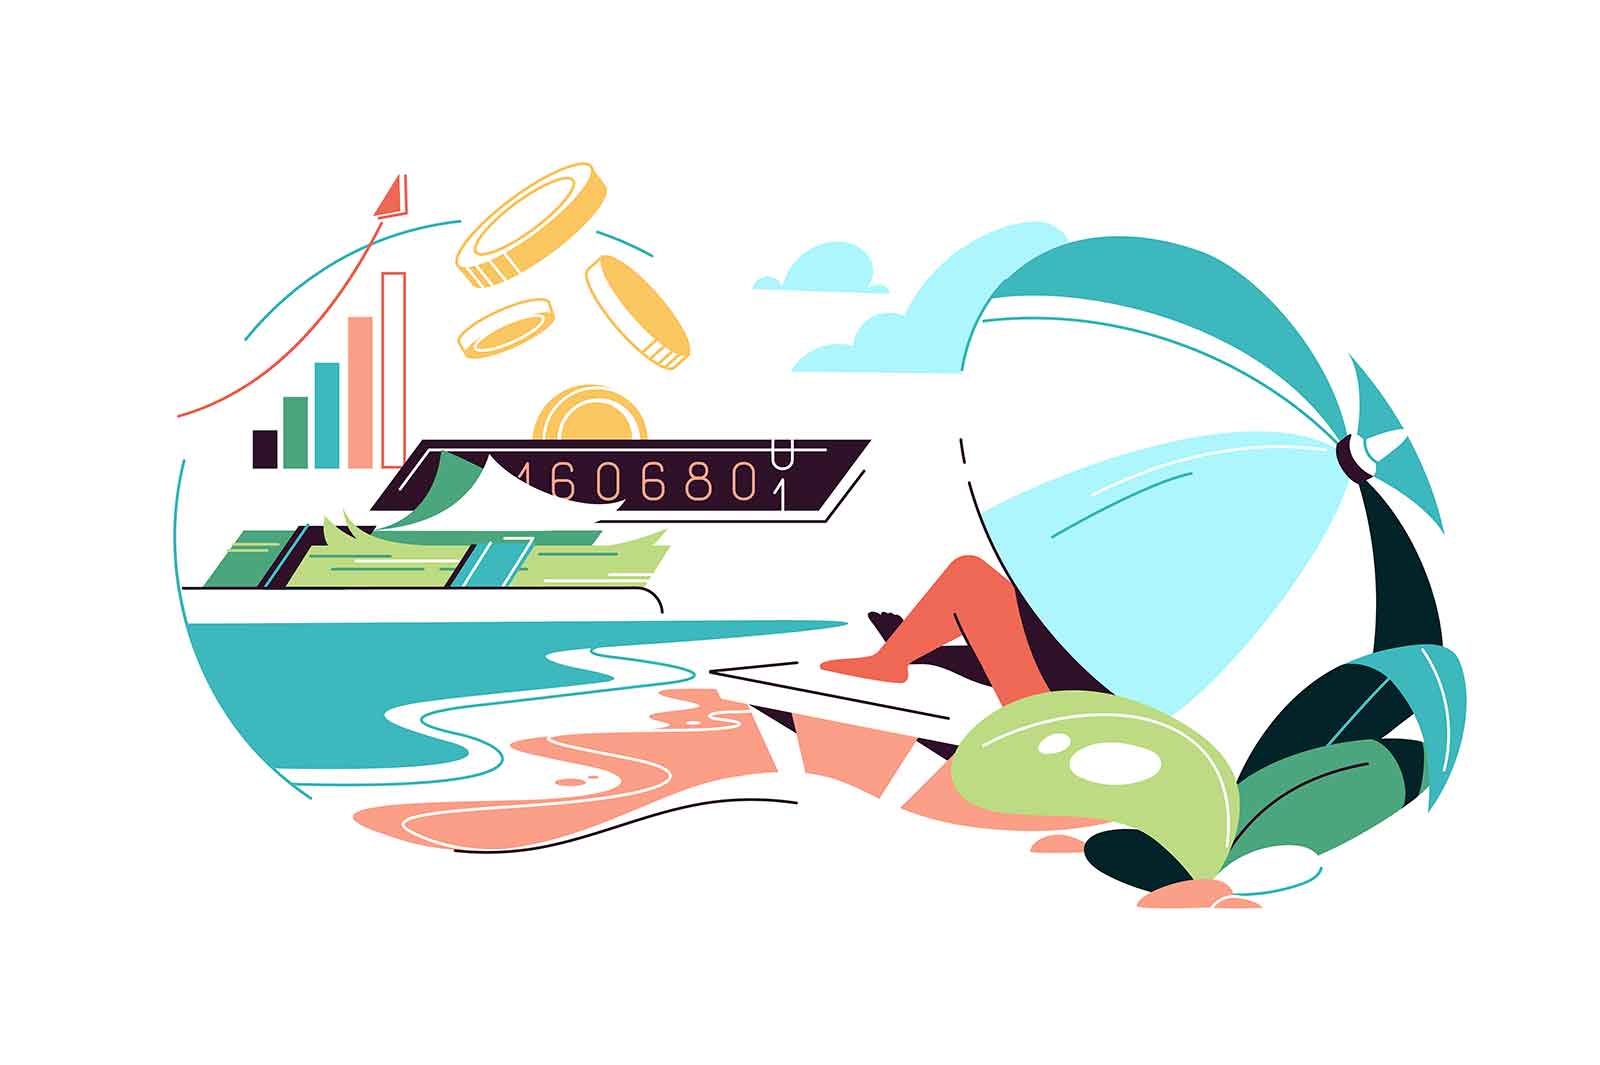 Passive income concept vector illustration. Person relaxing on a beach and earning money without actively working